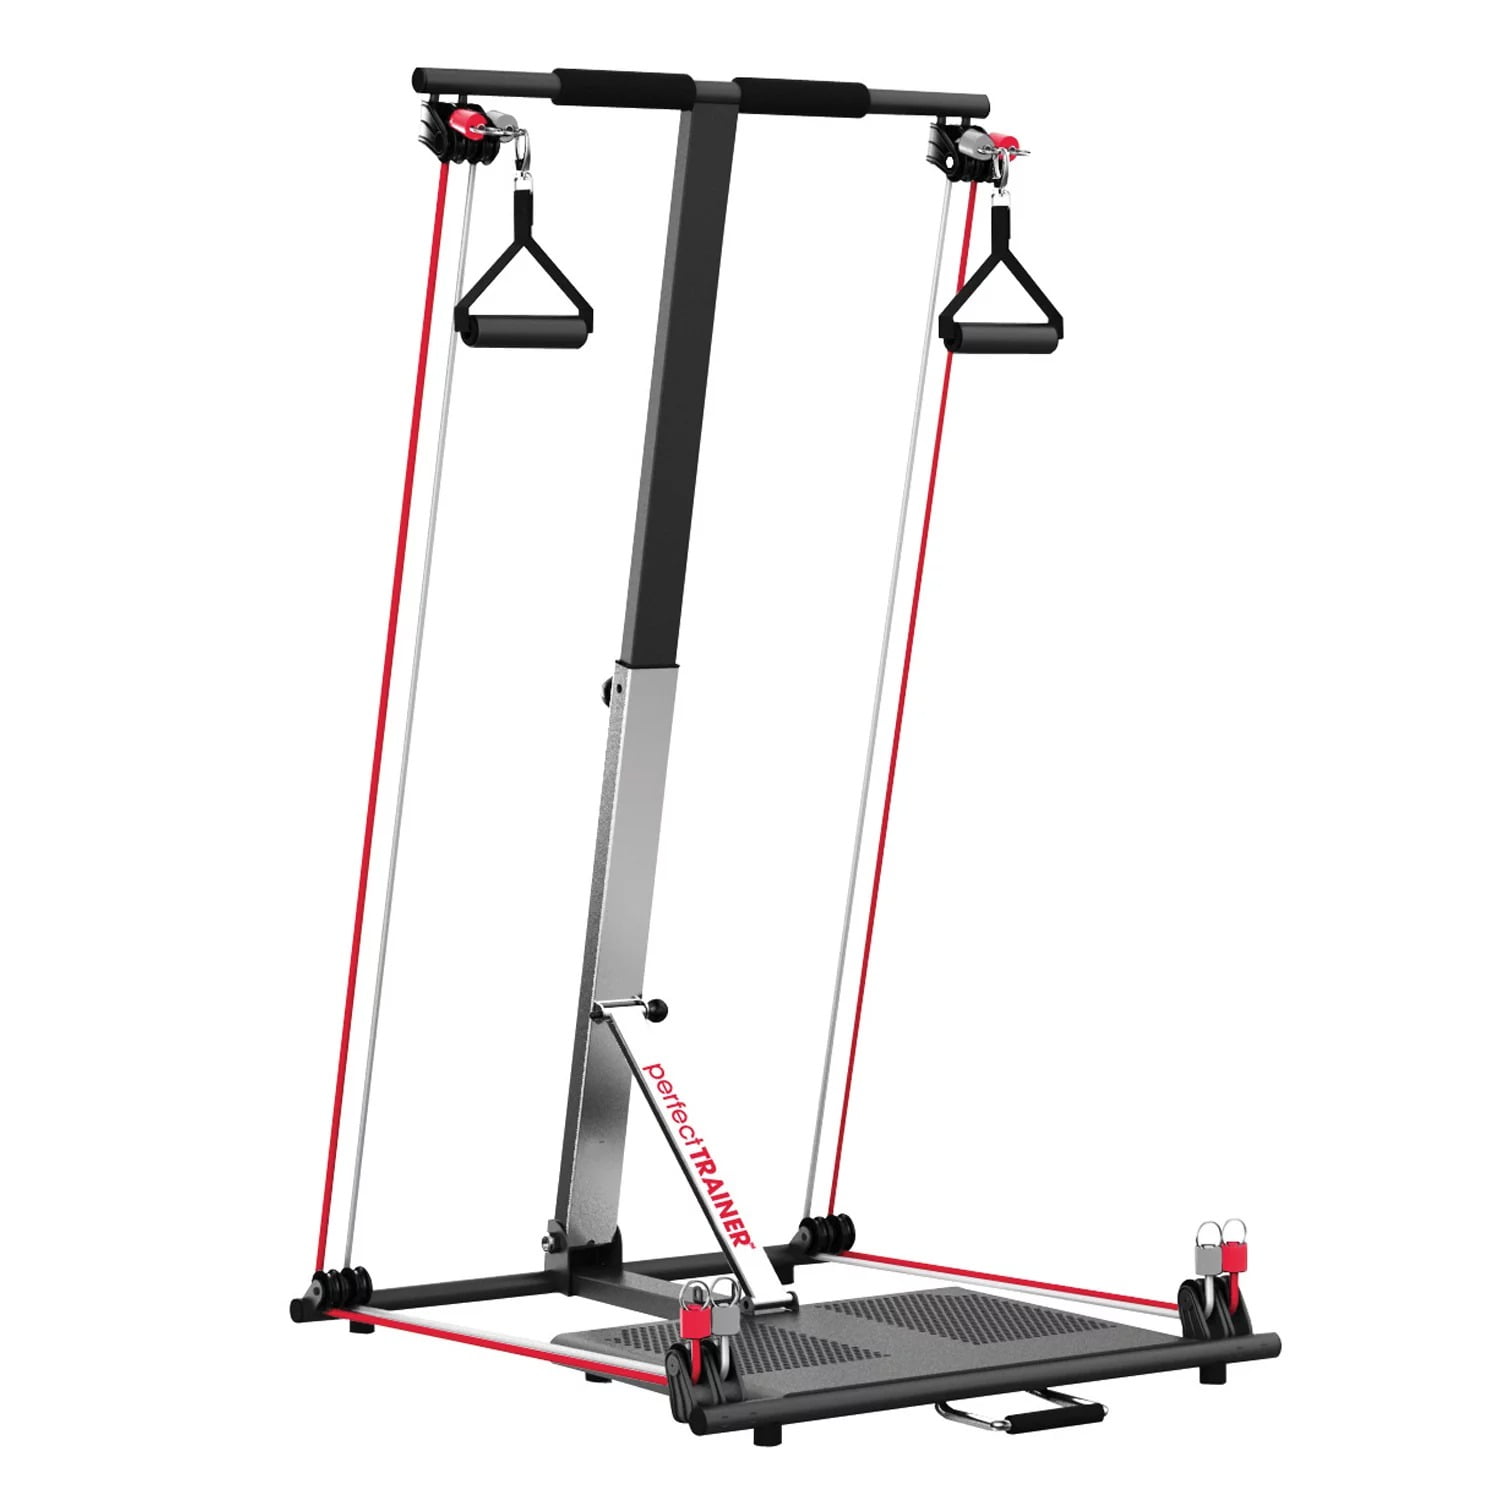 Zipfy Perfect by Tony Little Home Gym Resistance Exercise Fitness Machine - Walmart.com